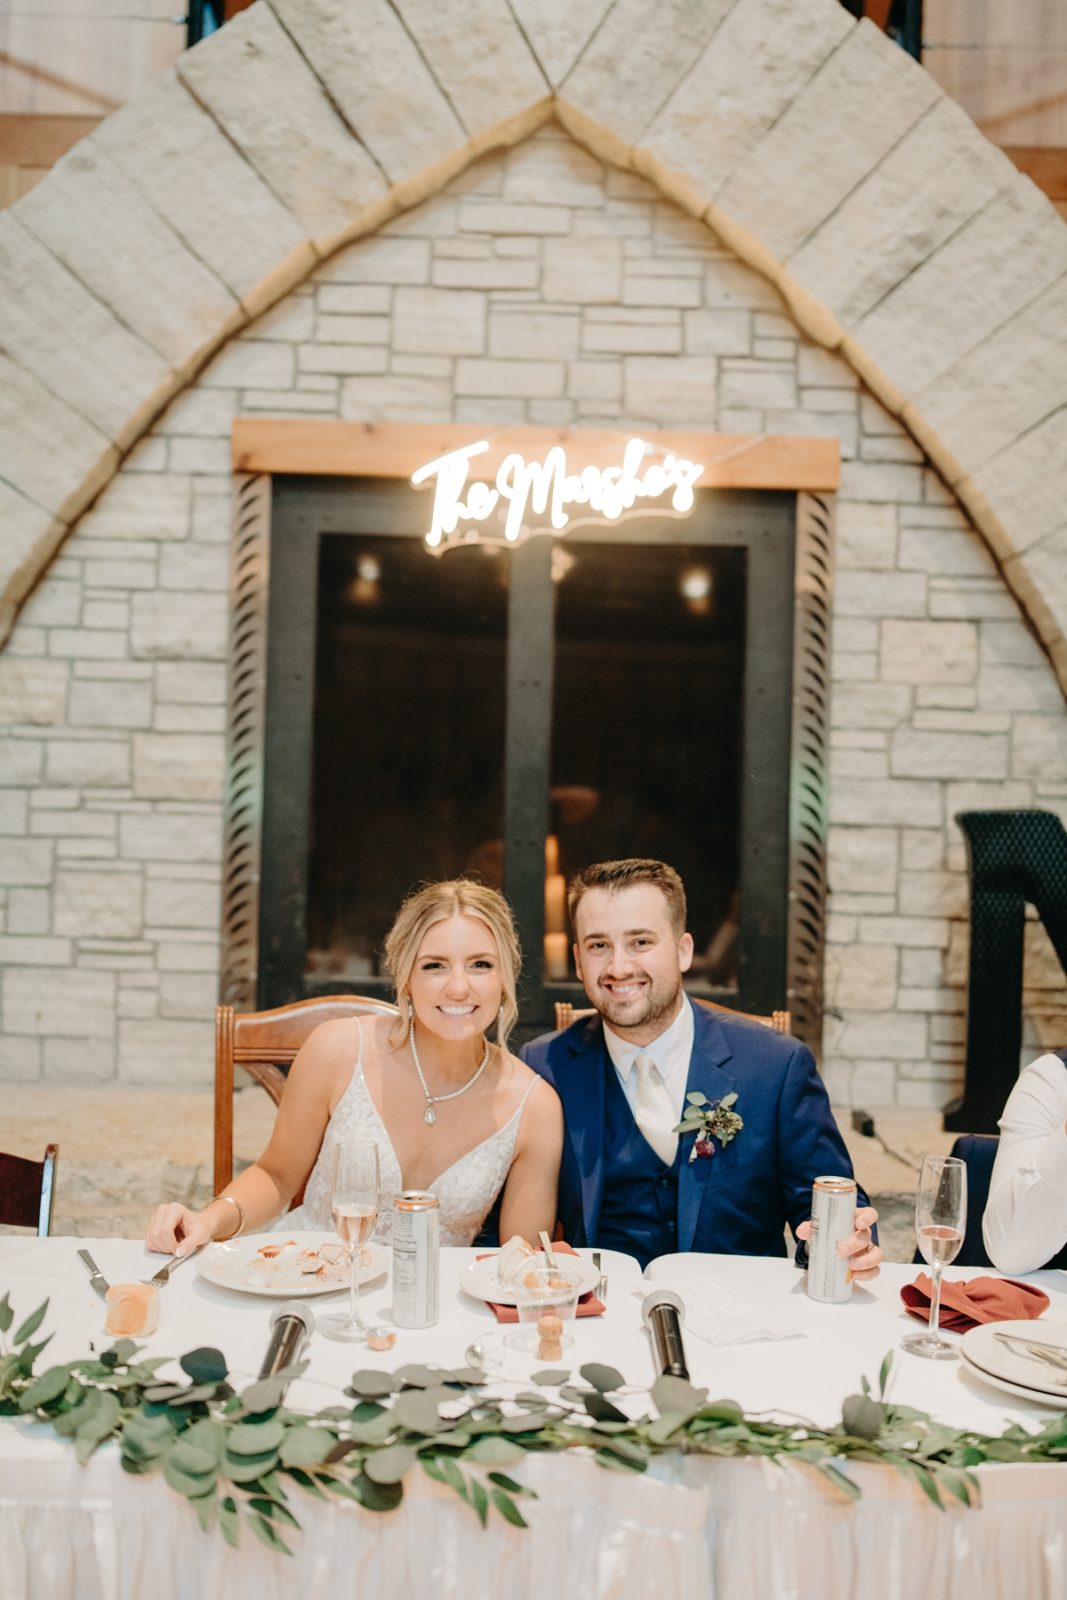 Bride and groom in front of custom neon sign at Celebration Farm Wedding reception in Iowa City